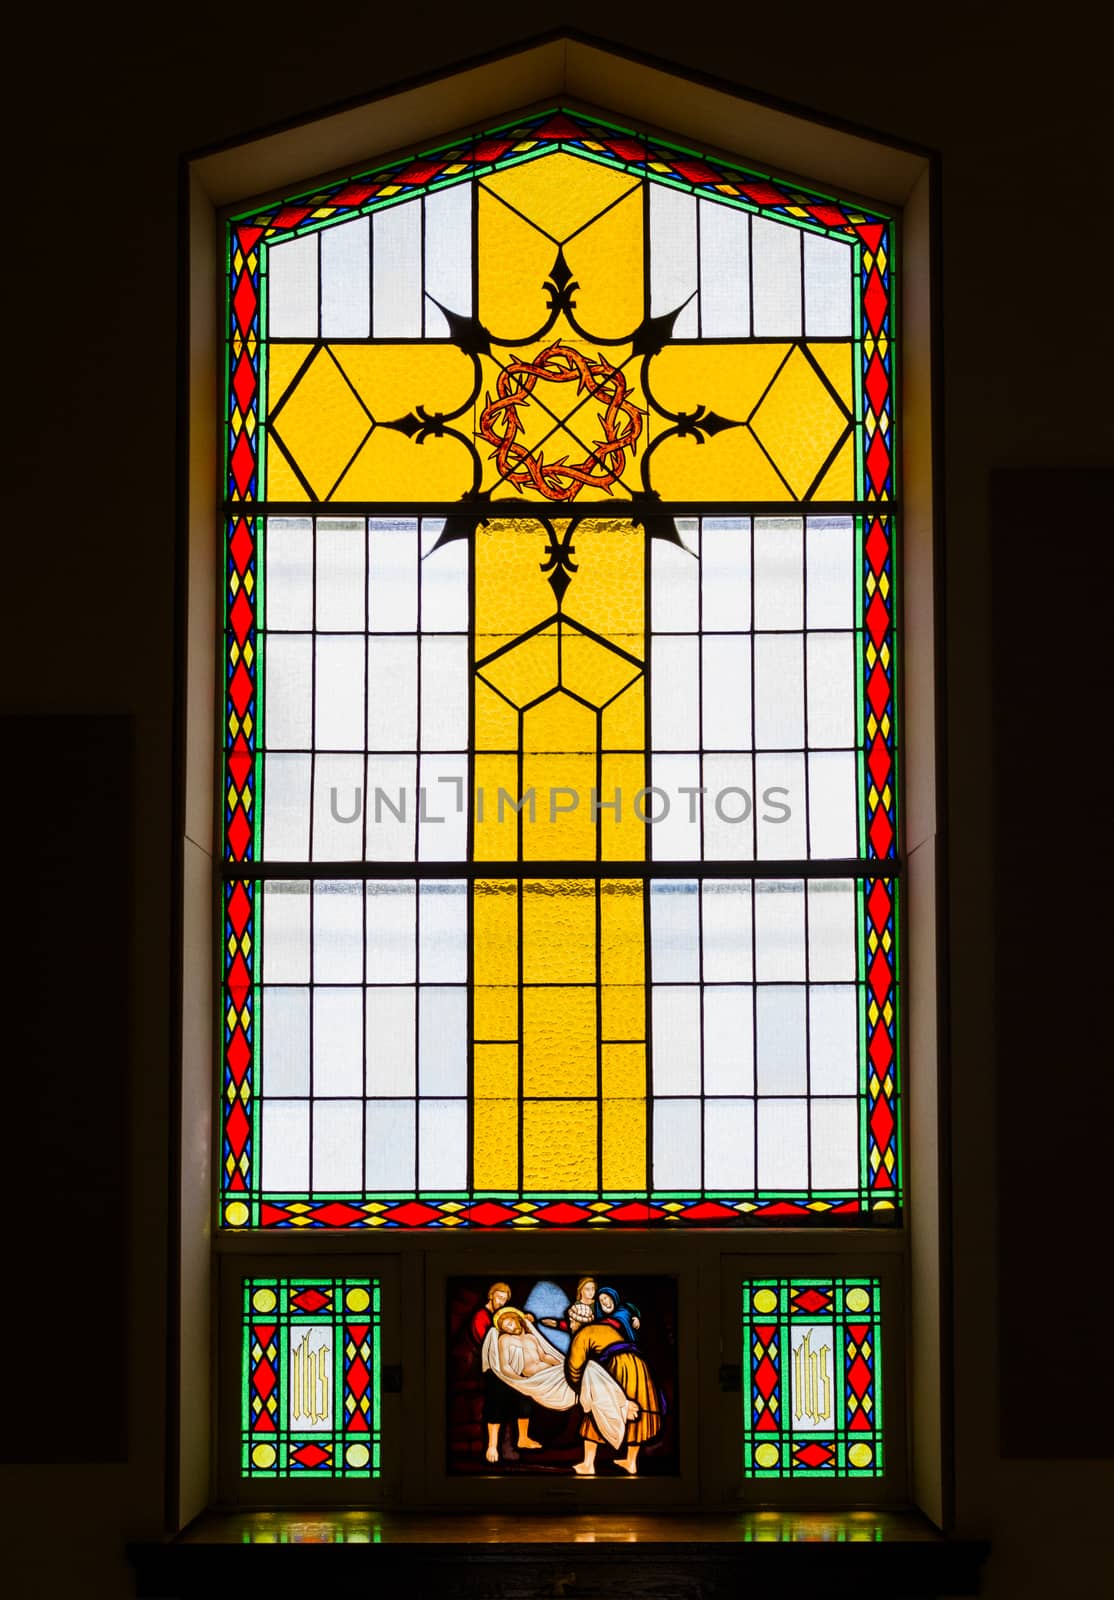 Stained Glass Details inside a Chusrch by aetb